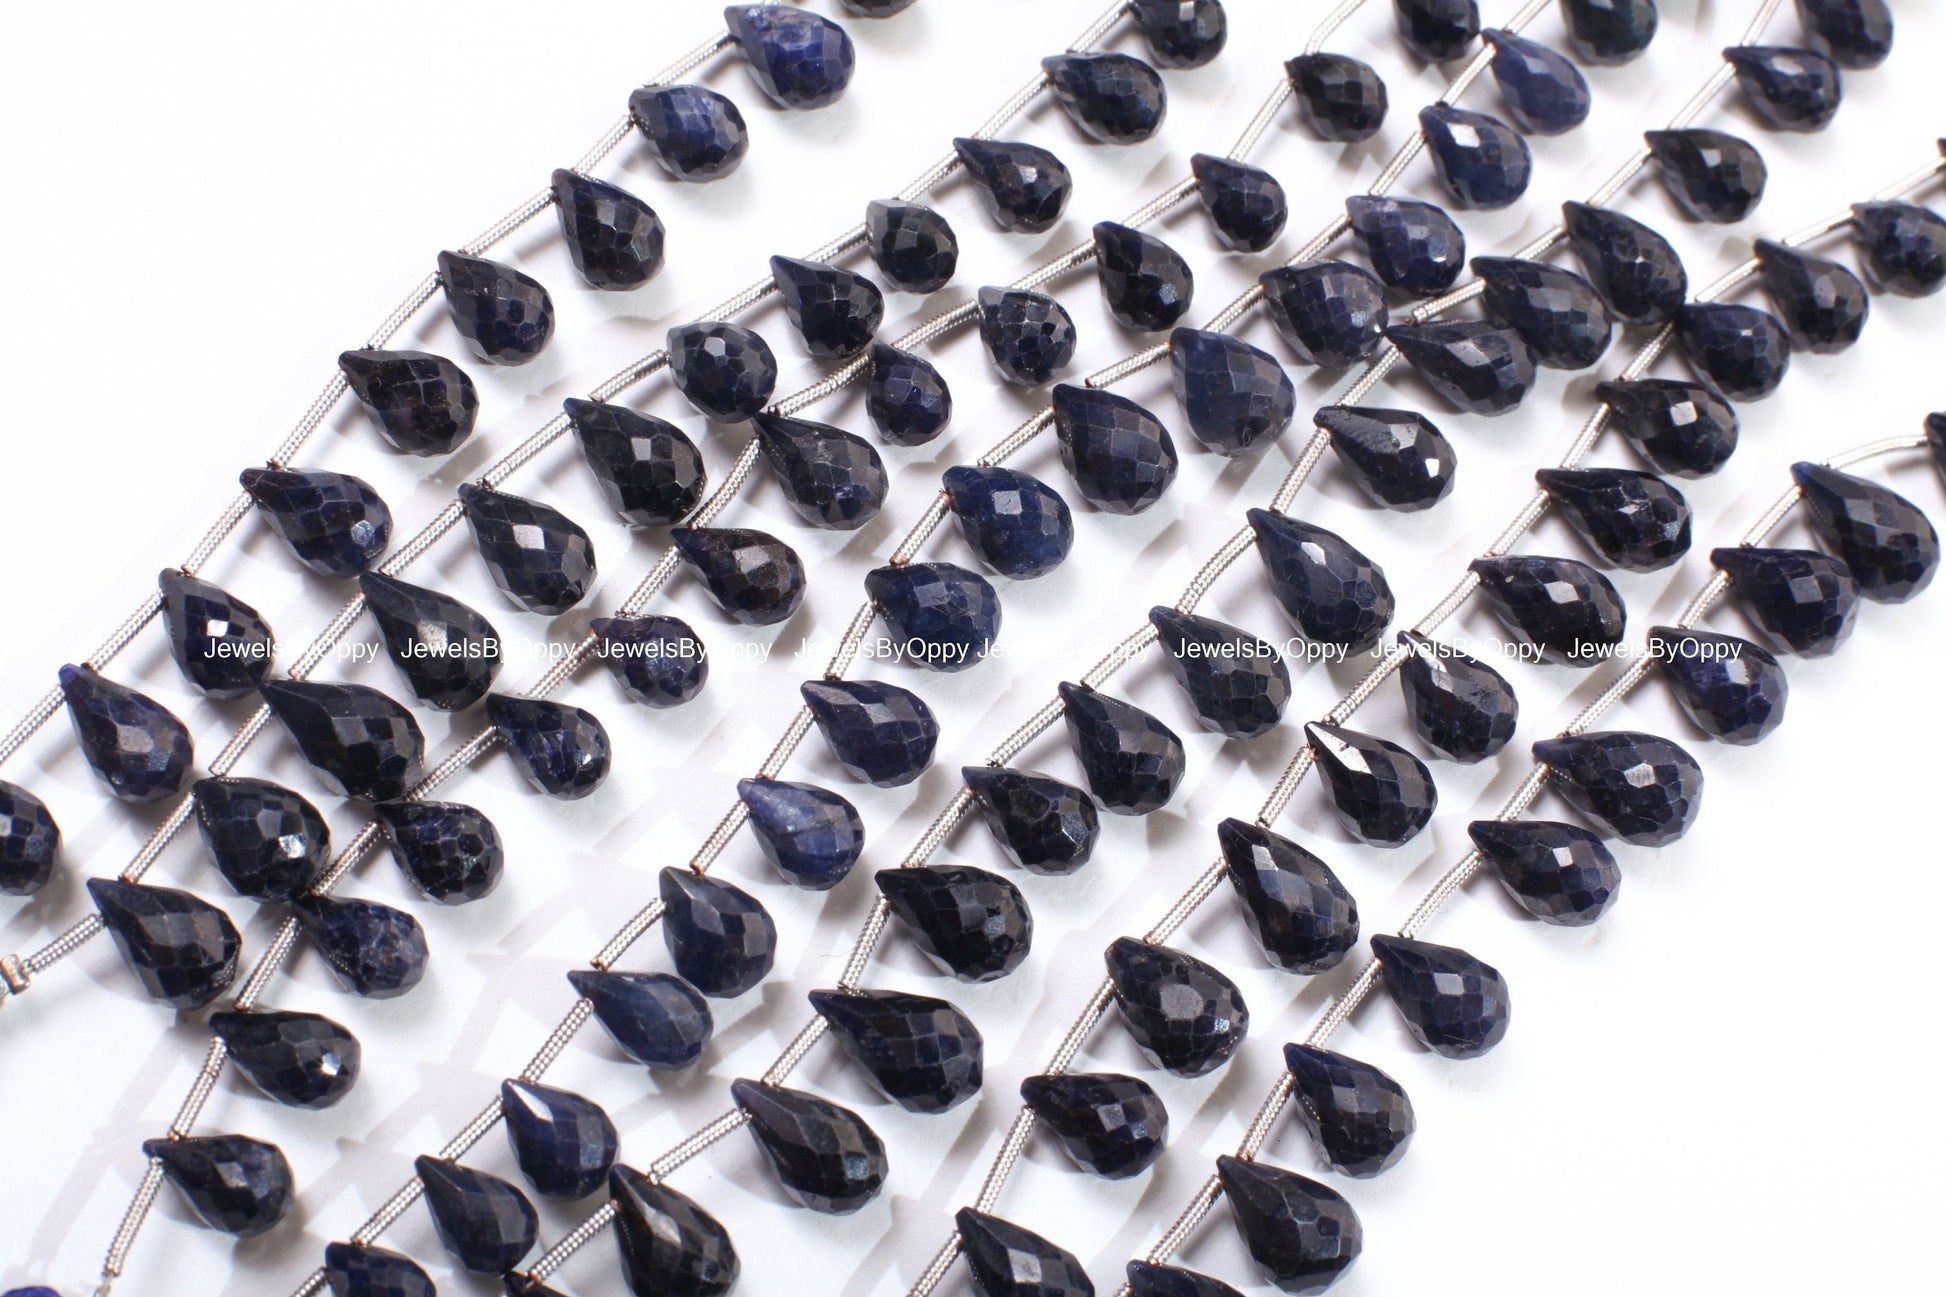 Sapphire Briolette, Natural Blue Sapphire Faceted Teardrop 6x10.5-7x11.5mm Gemstone Briolette Jewelry Beads 10 pcs or 20 pcs Strand